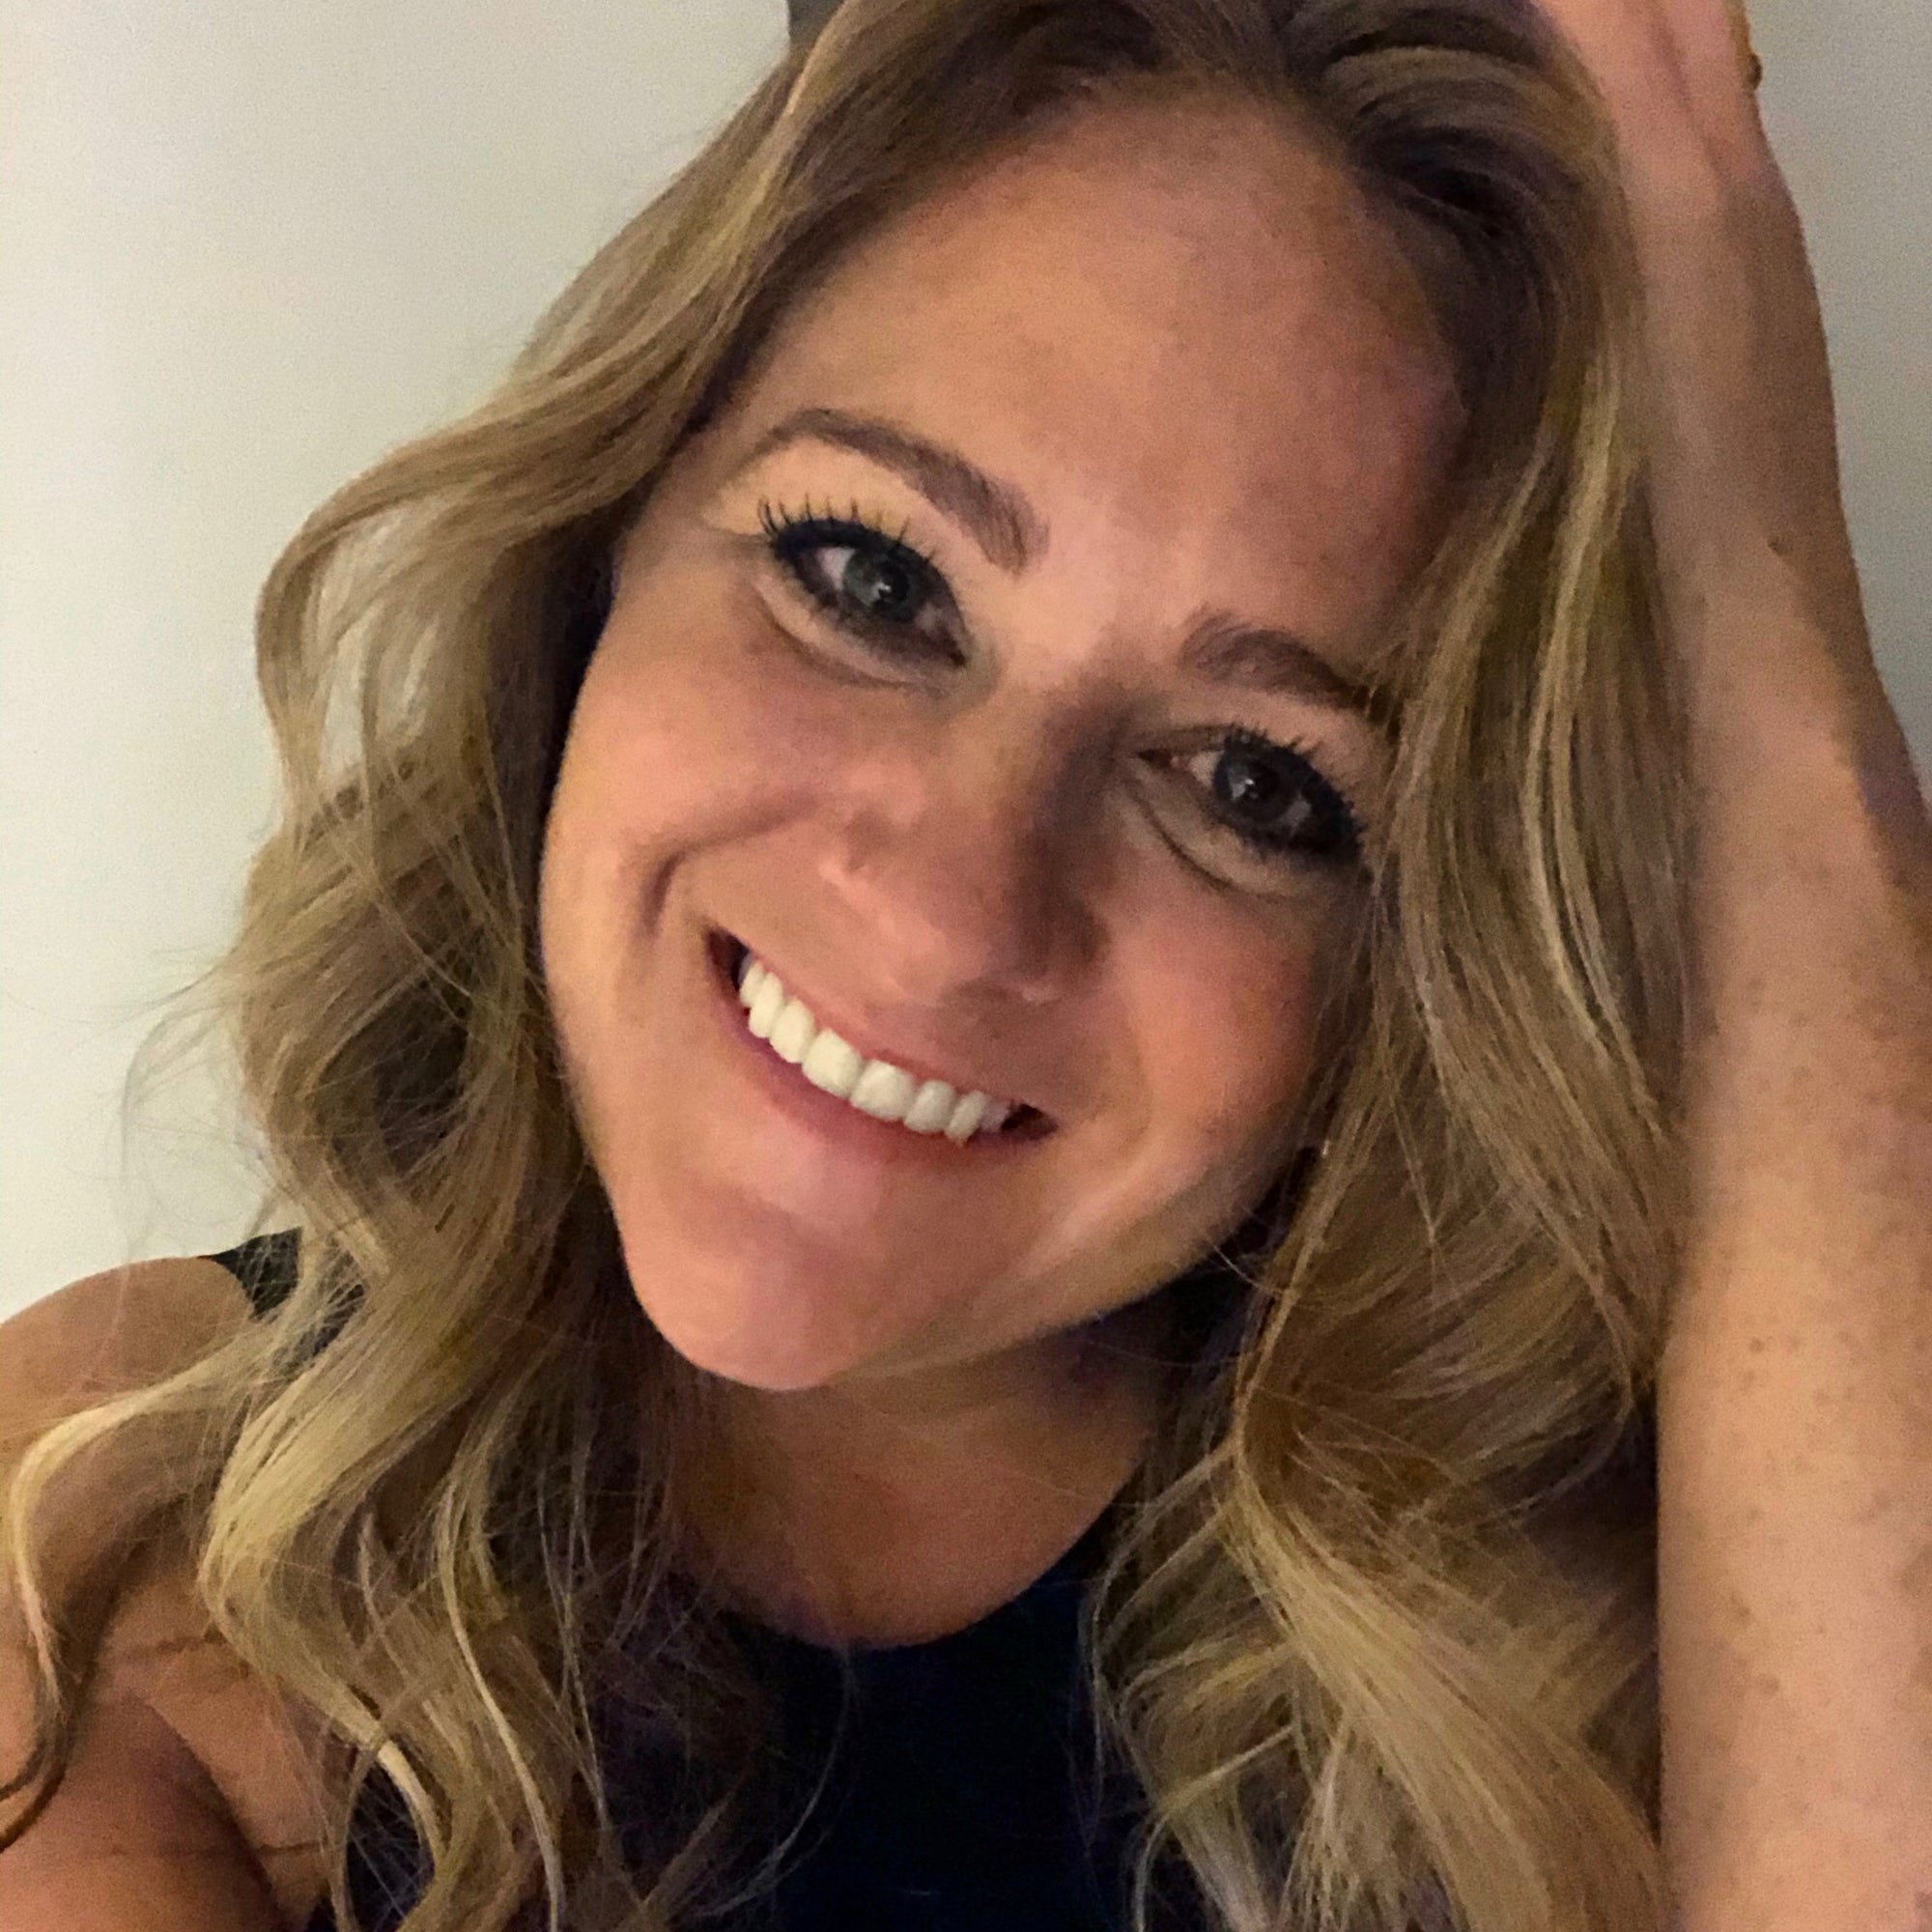 A Journey to Self-Love - A Message From Kristine Deer